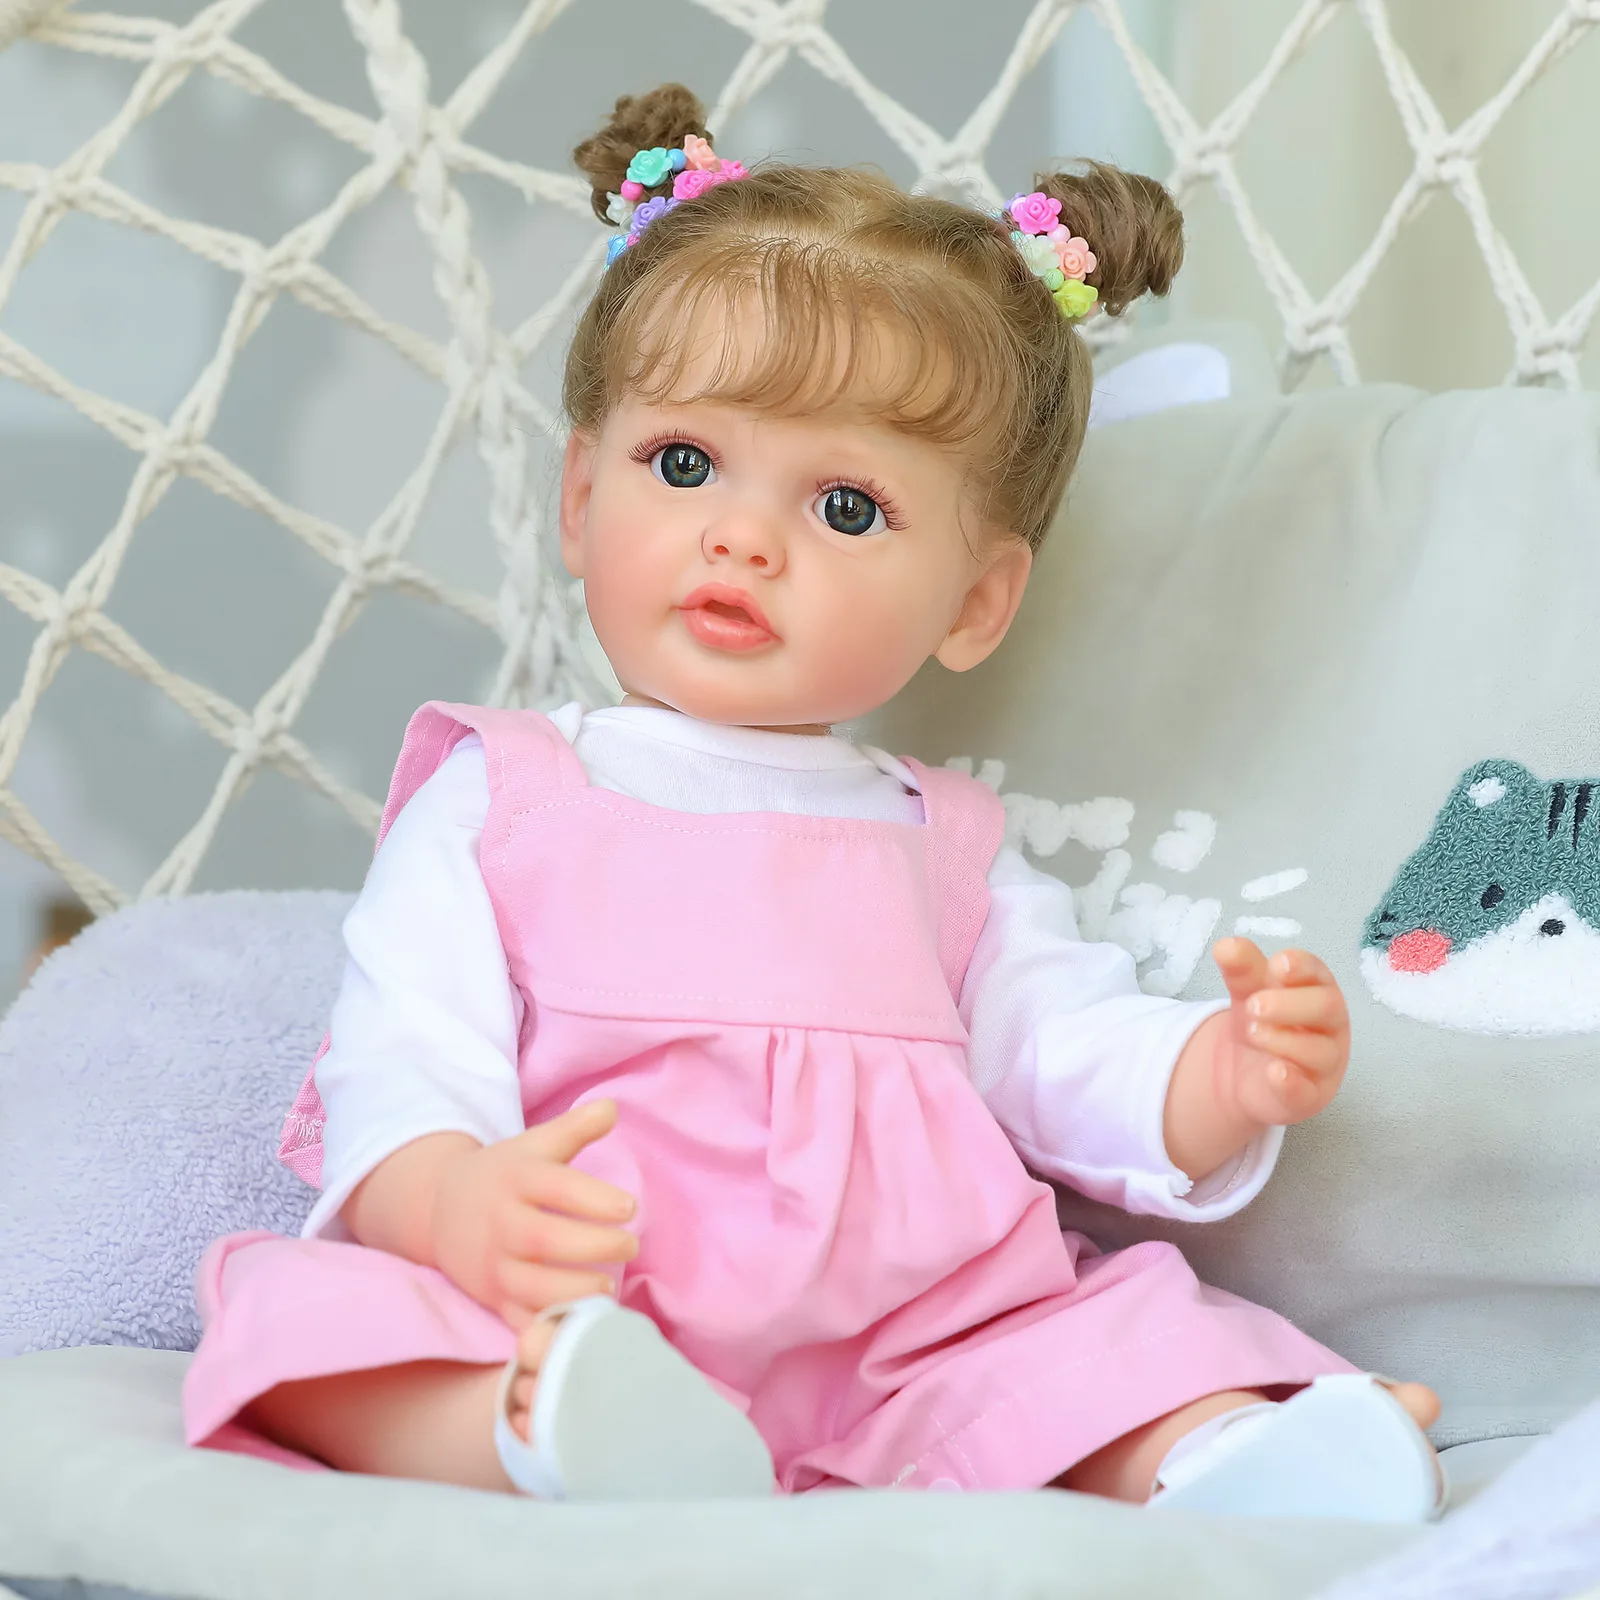 Finished Bebe Reborn Doll 55CM Reborn Baby Full Body Soft Silicone Real Touch Doll Hand Painted 3D Skin Rooted Hair Gifts Child crystal bejeweled enameled hinged trinket box rooster chicken chickens gifts display trinket box hand painted